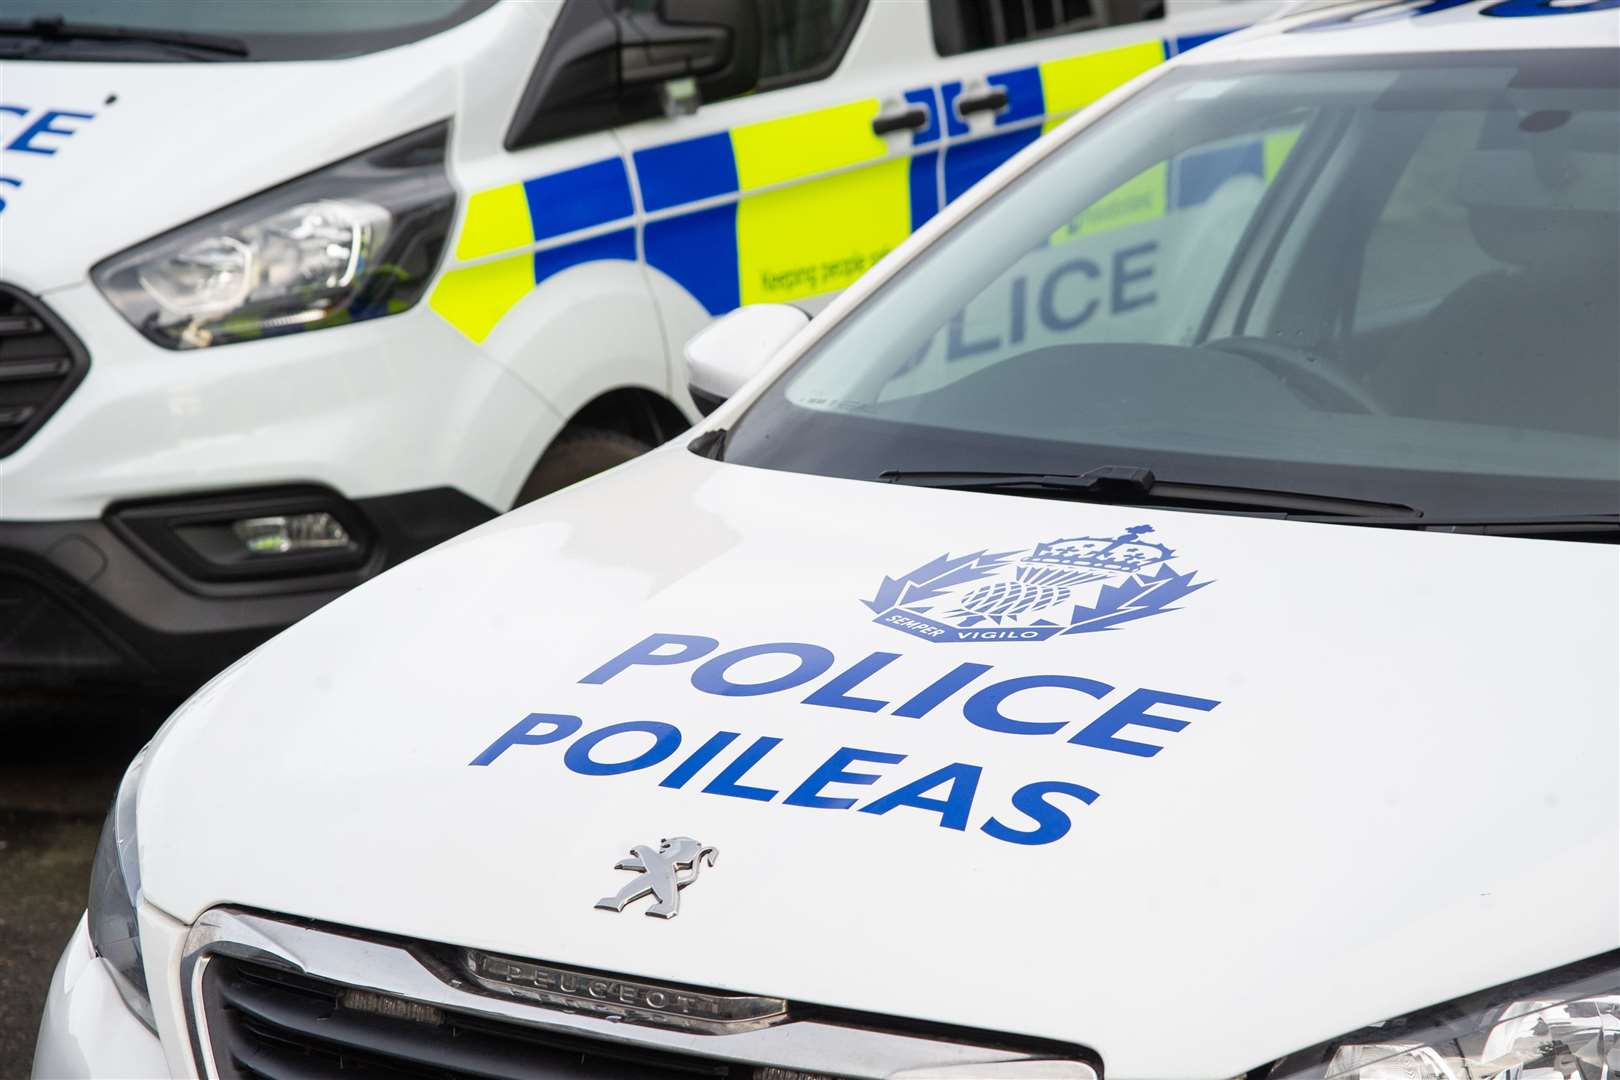 Police are appealing for information after a man was assaulted in Alford.